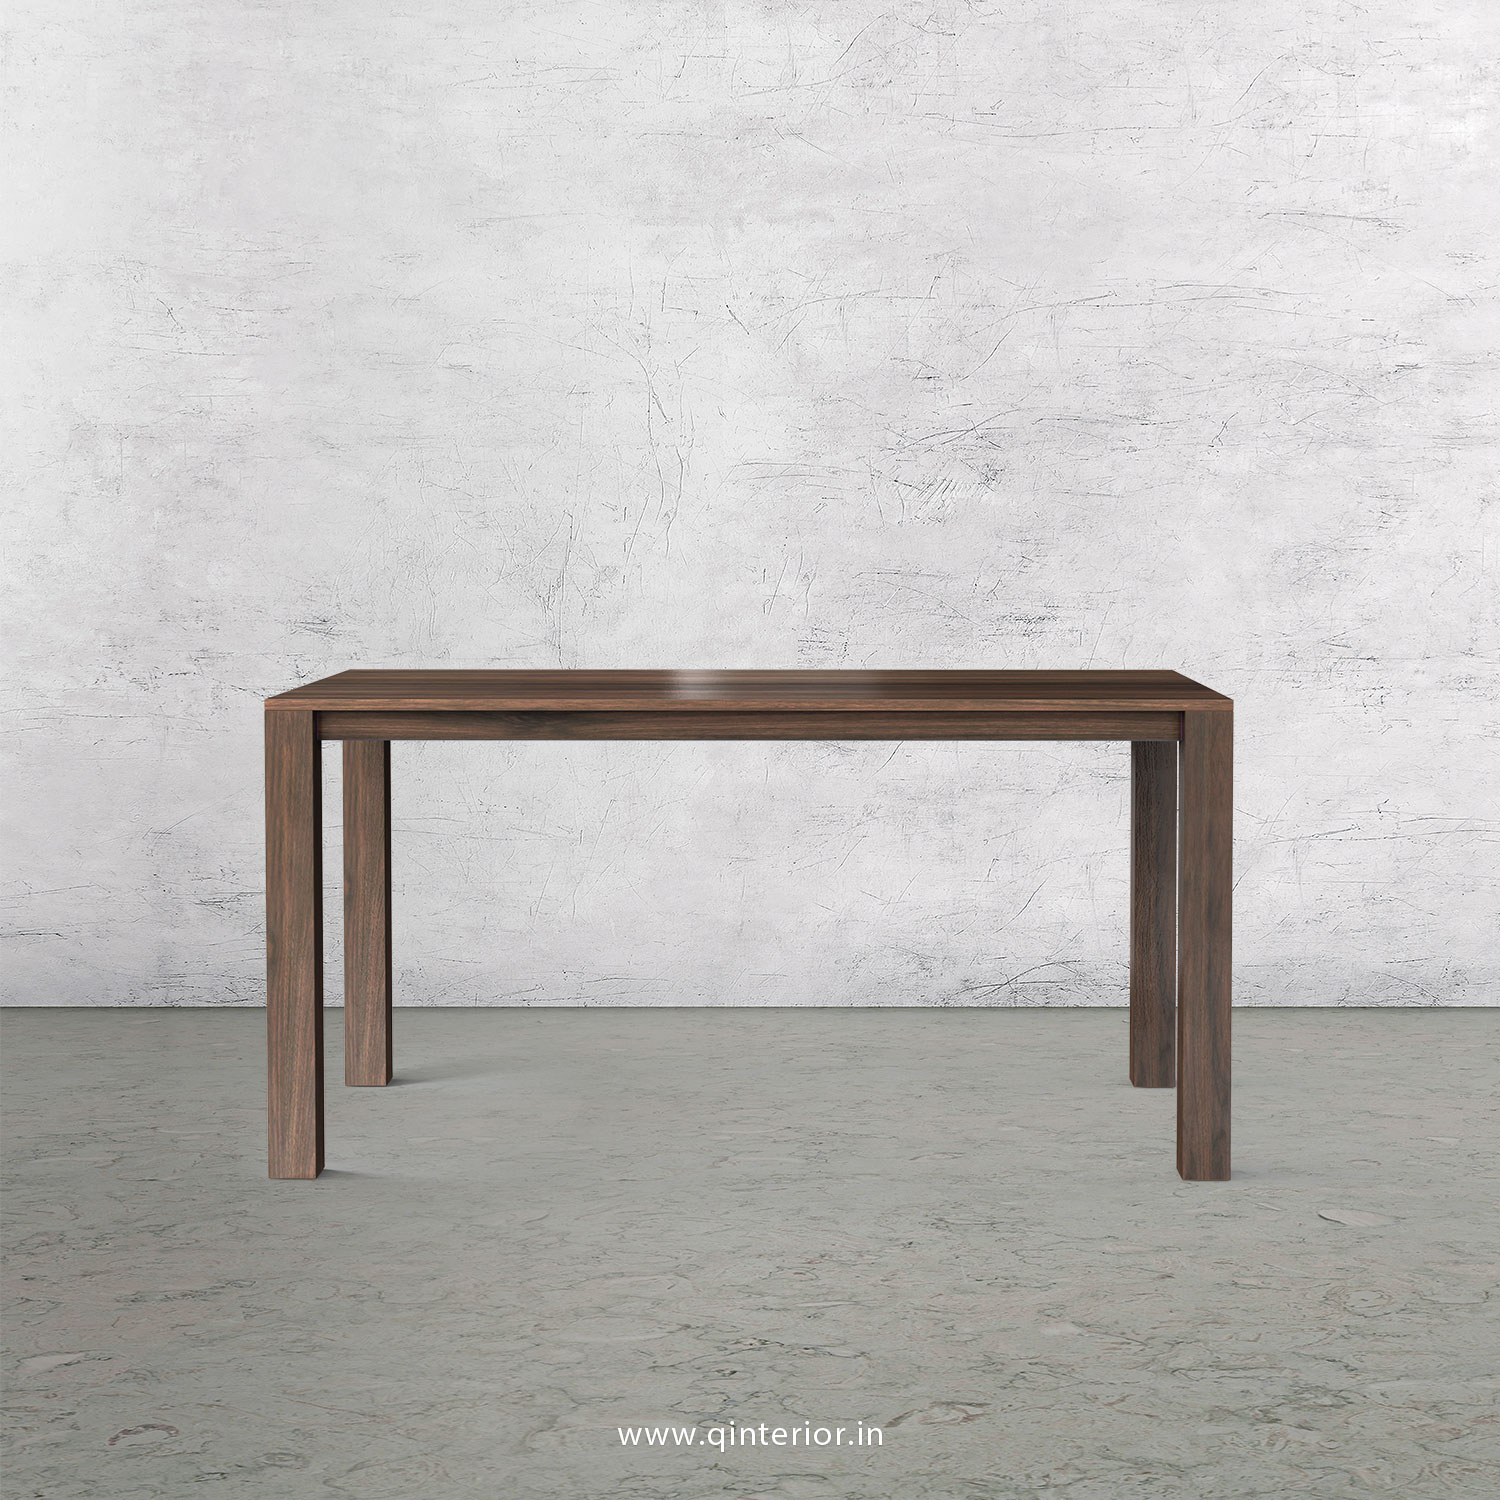 Windsor Dining Table in Walnut Finish - DTB001 C1